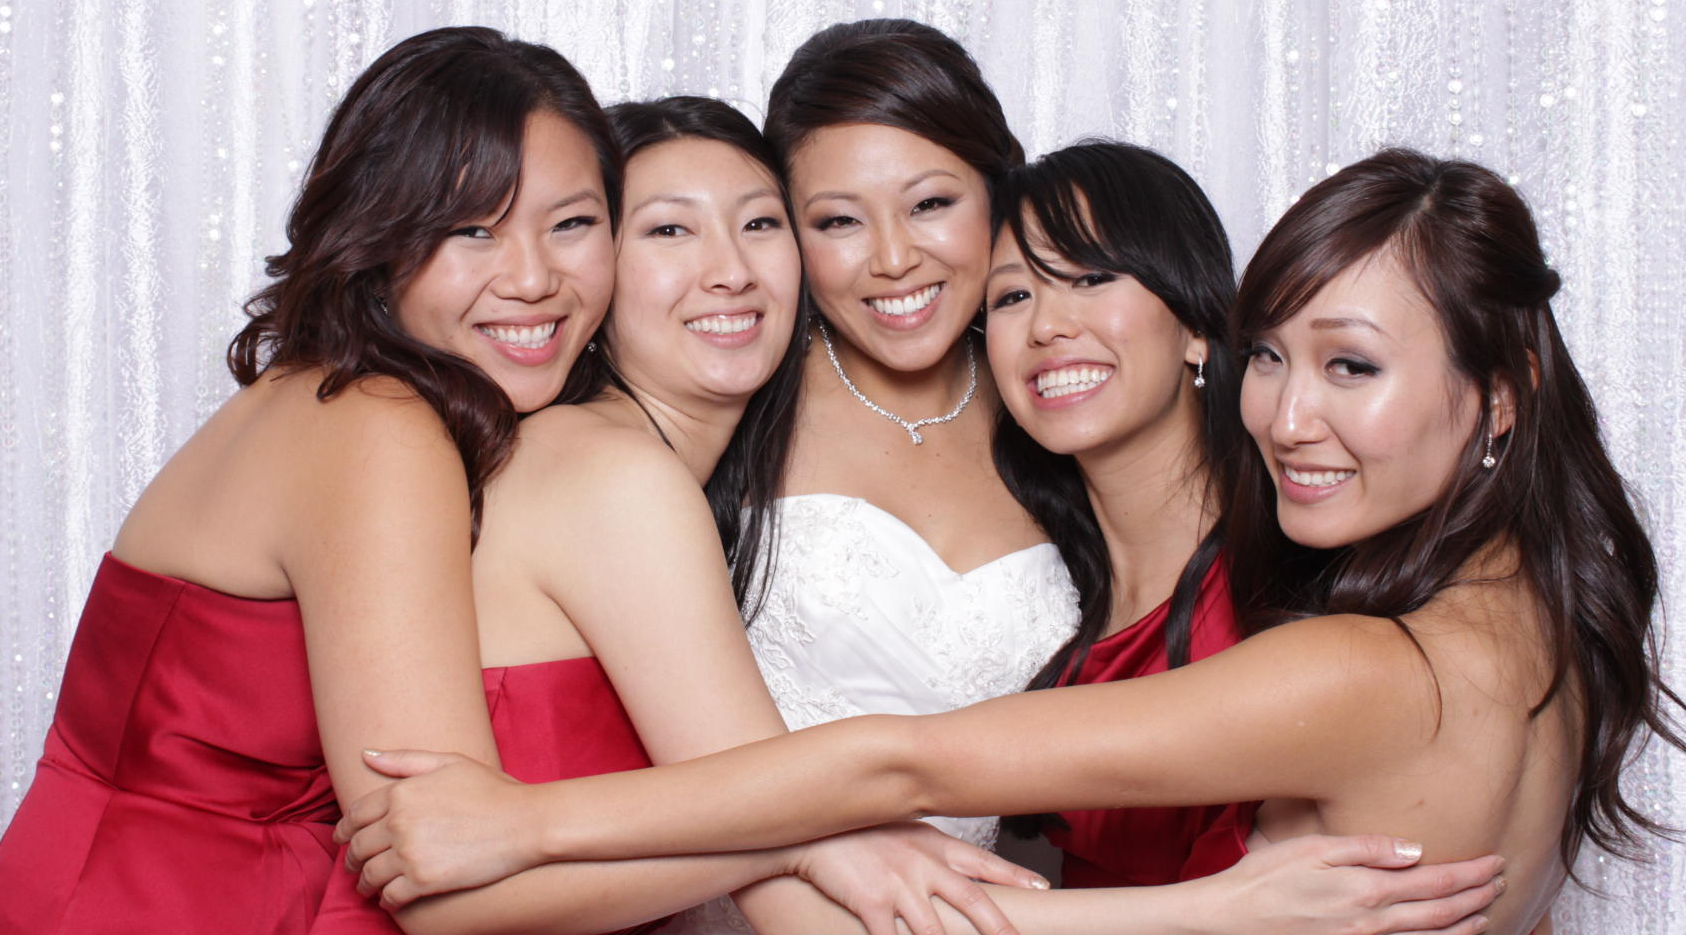 A bride and her bridesmaids are posing for a picture in a photo booth.